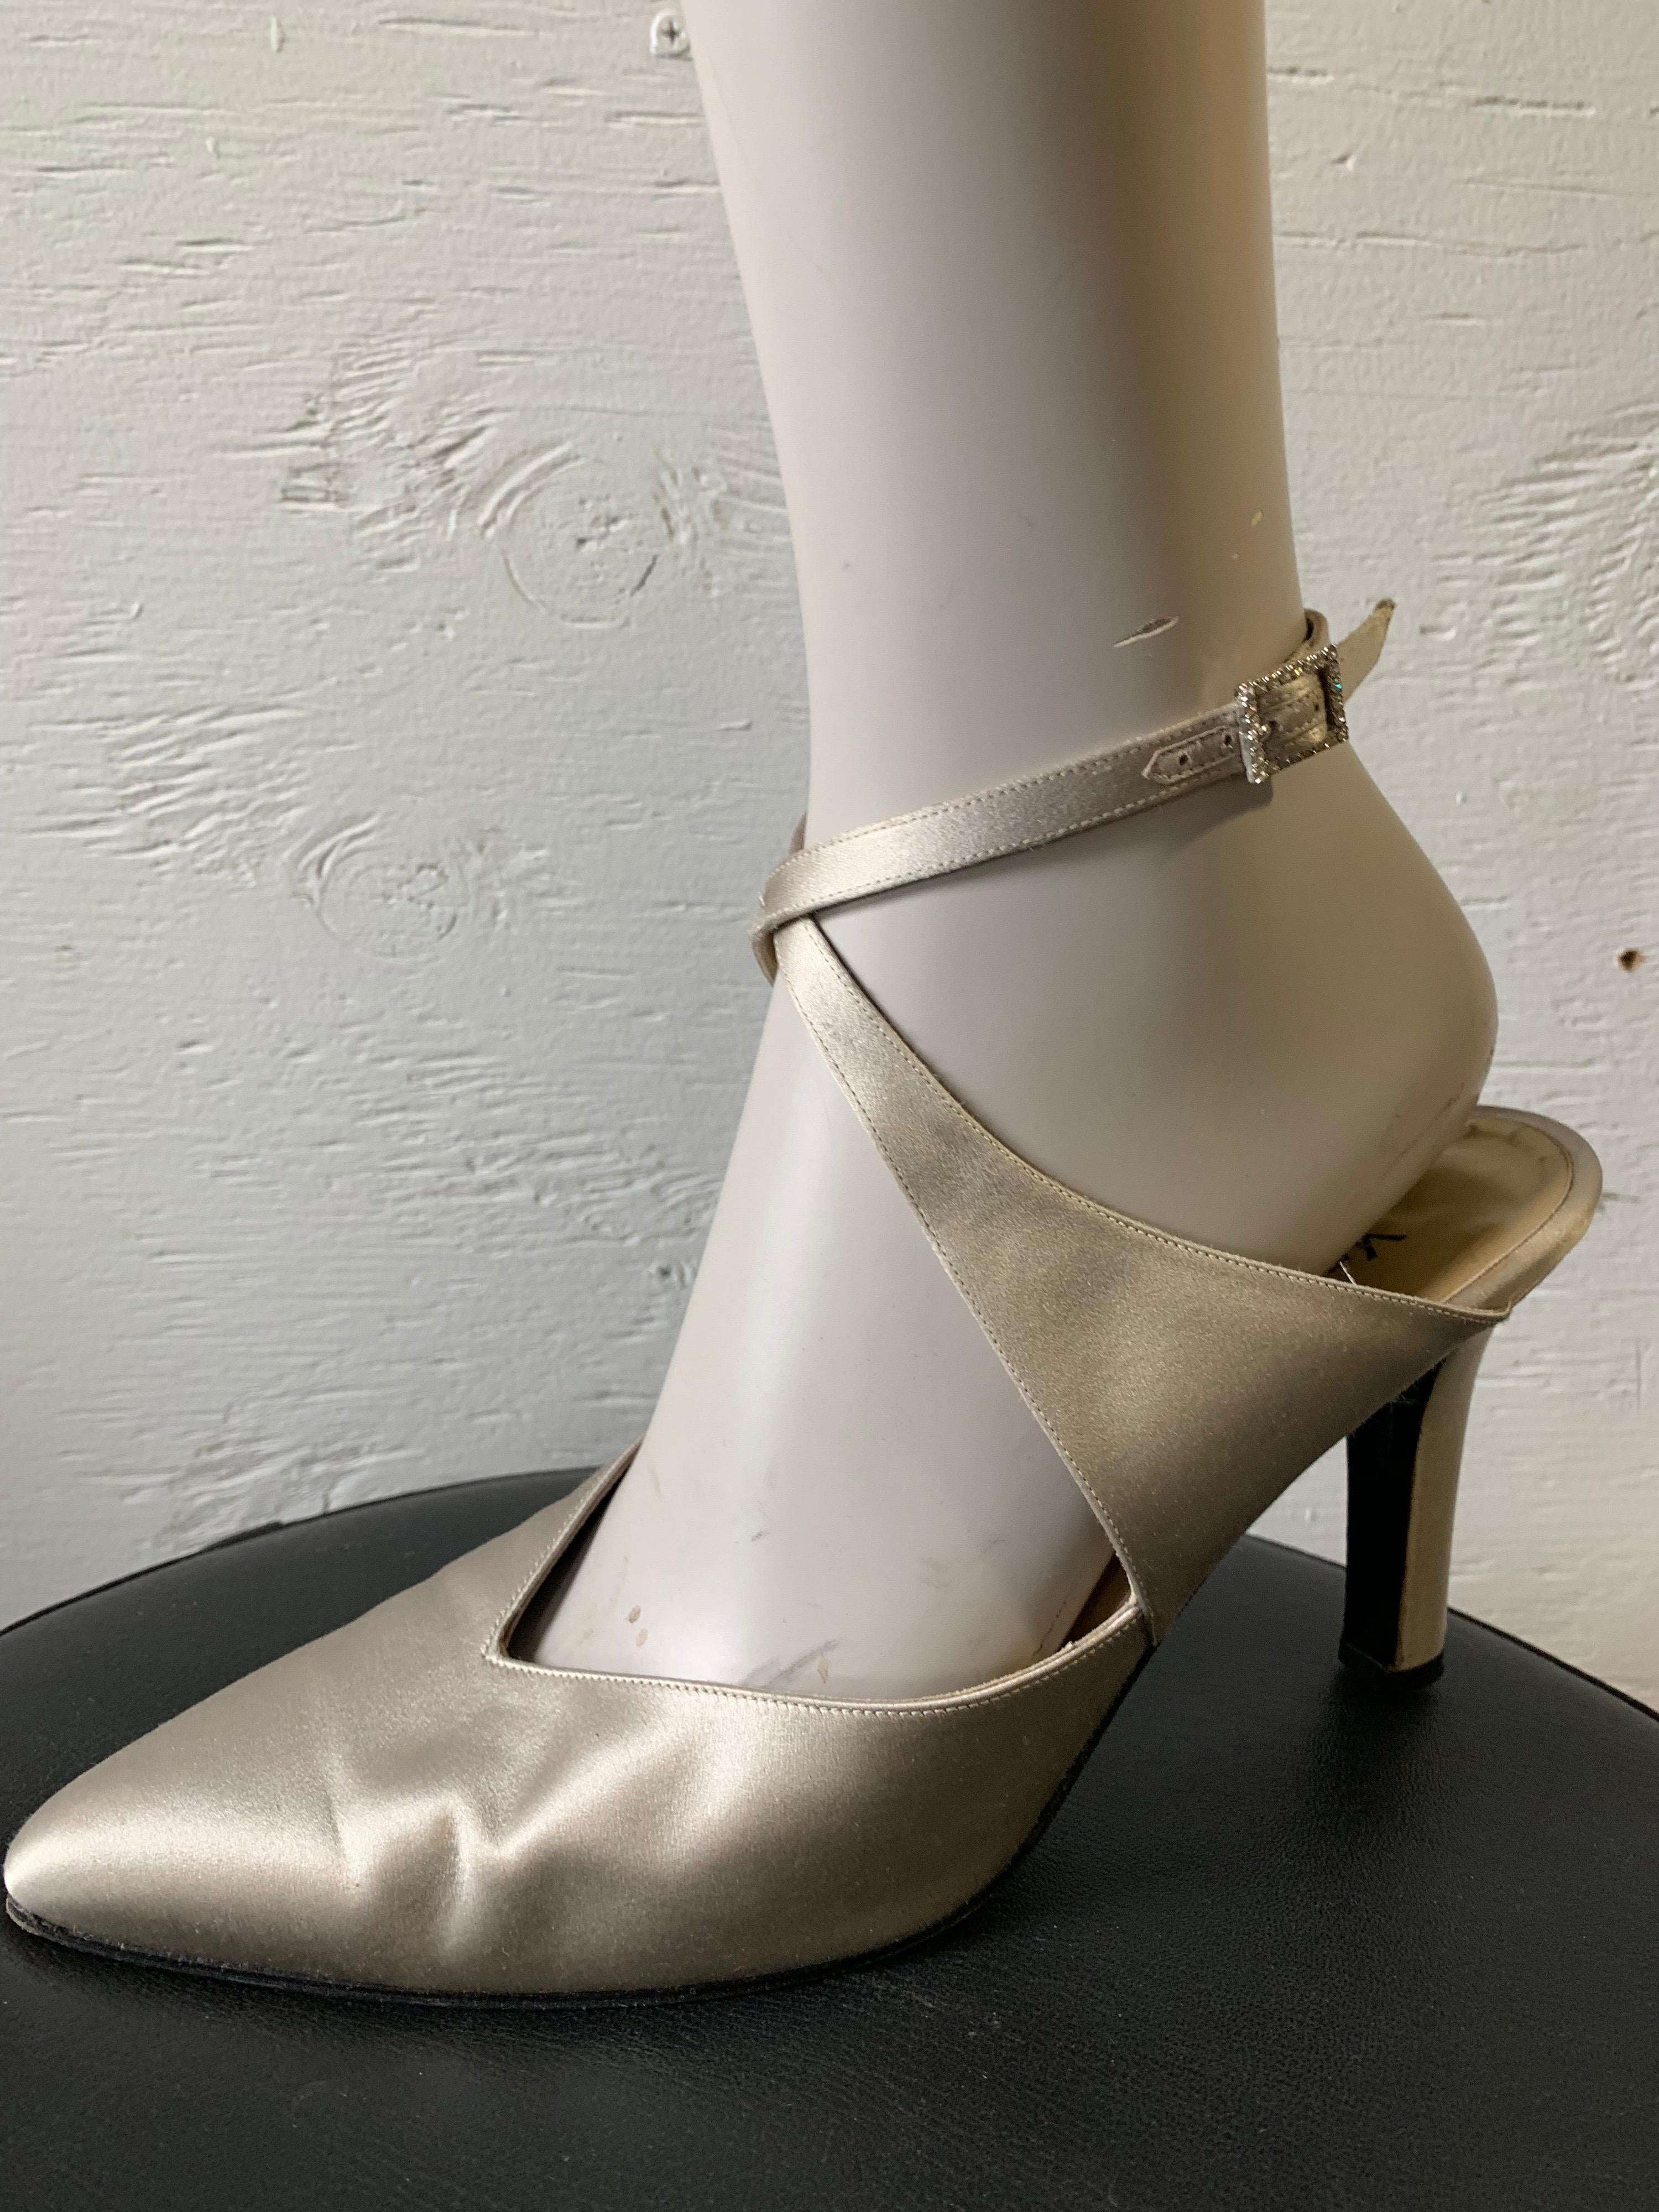 1980s Yves Saint Laurent Silver Satin Ankle-Cross Stillettos W/ Pointed Toe For Sale 2